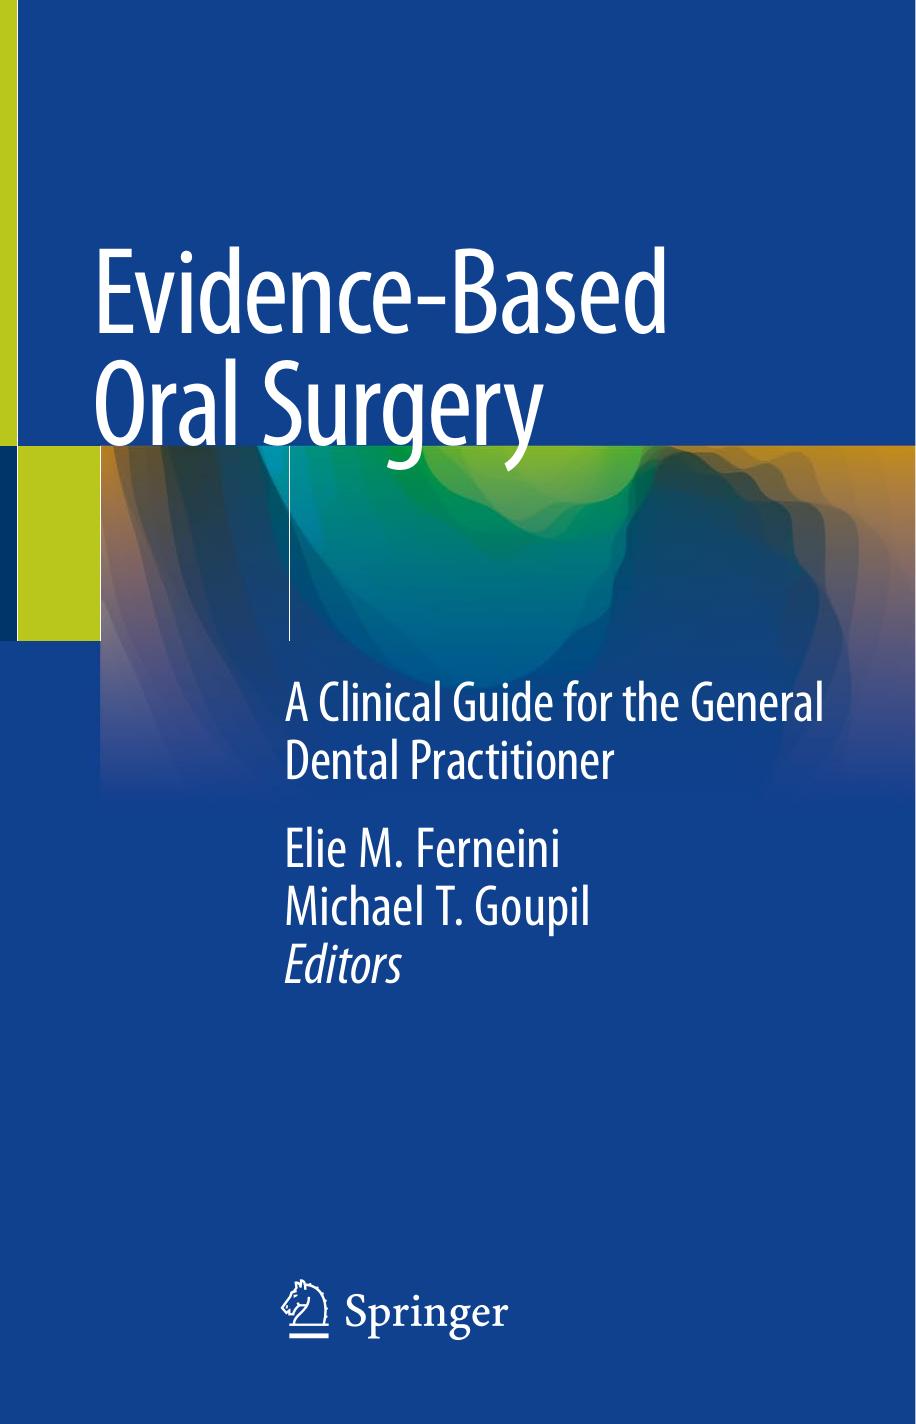 Evidence-Based Oral Surgery A Clinical Guide for the General Dental 2019